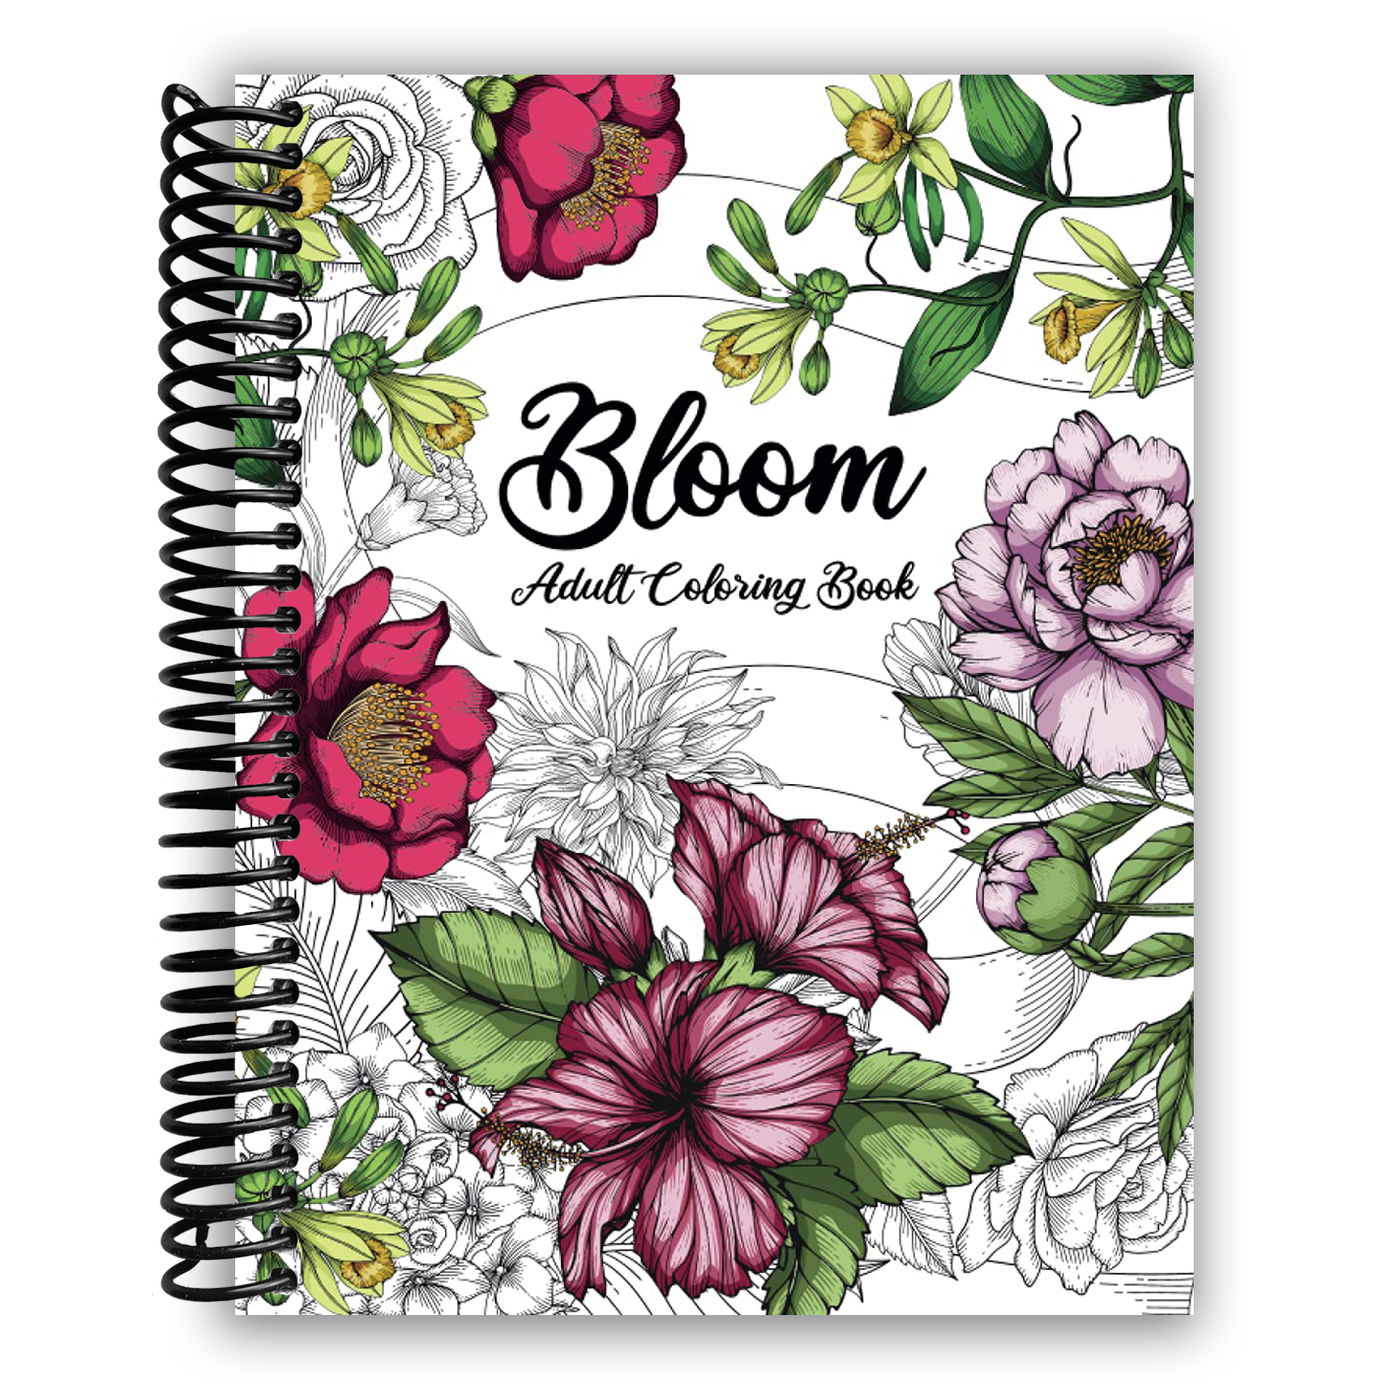 Bloom Adult Coloring Book: Beautiful Flower Garden Patterns and Botanical Floral Prints - Over 50 Designs of Relaxing Nature and Plants to Color [Book]